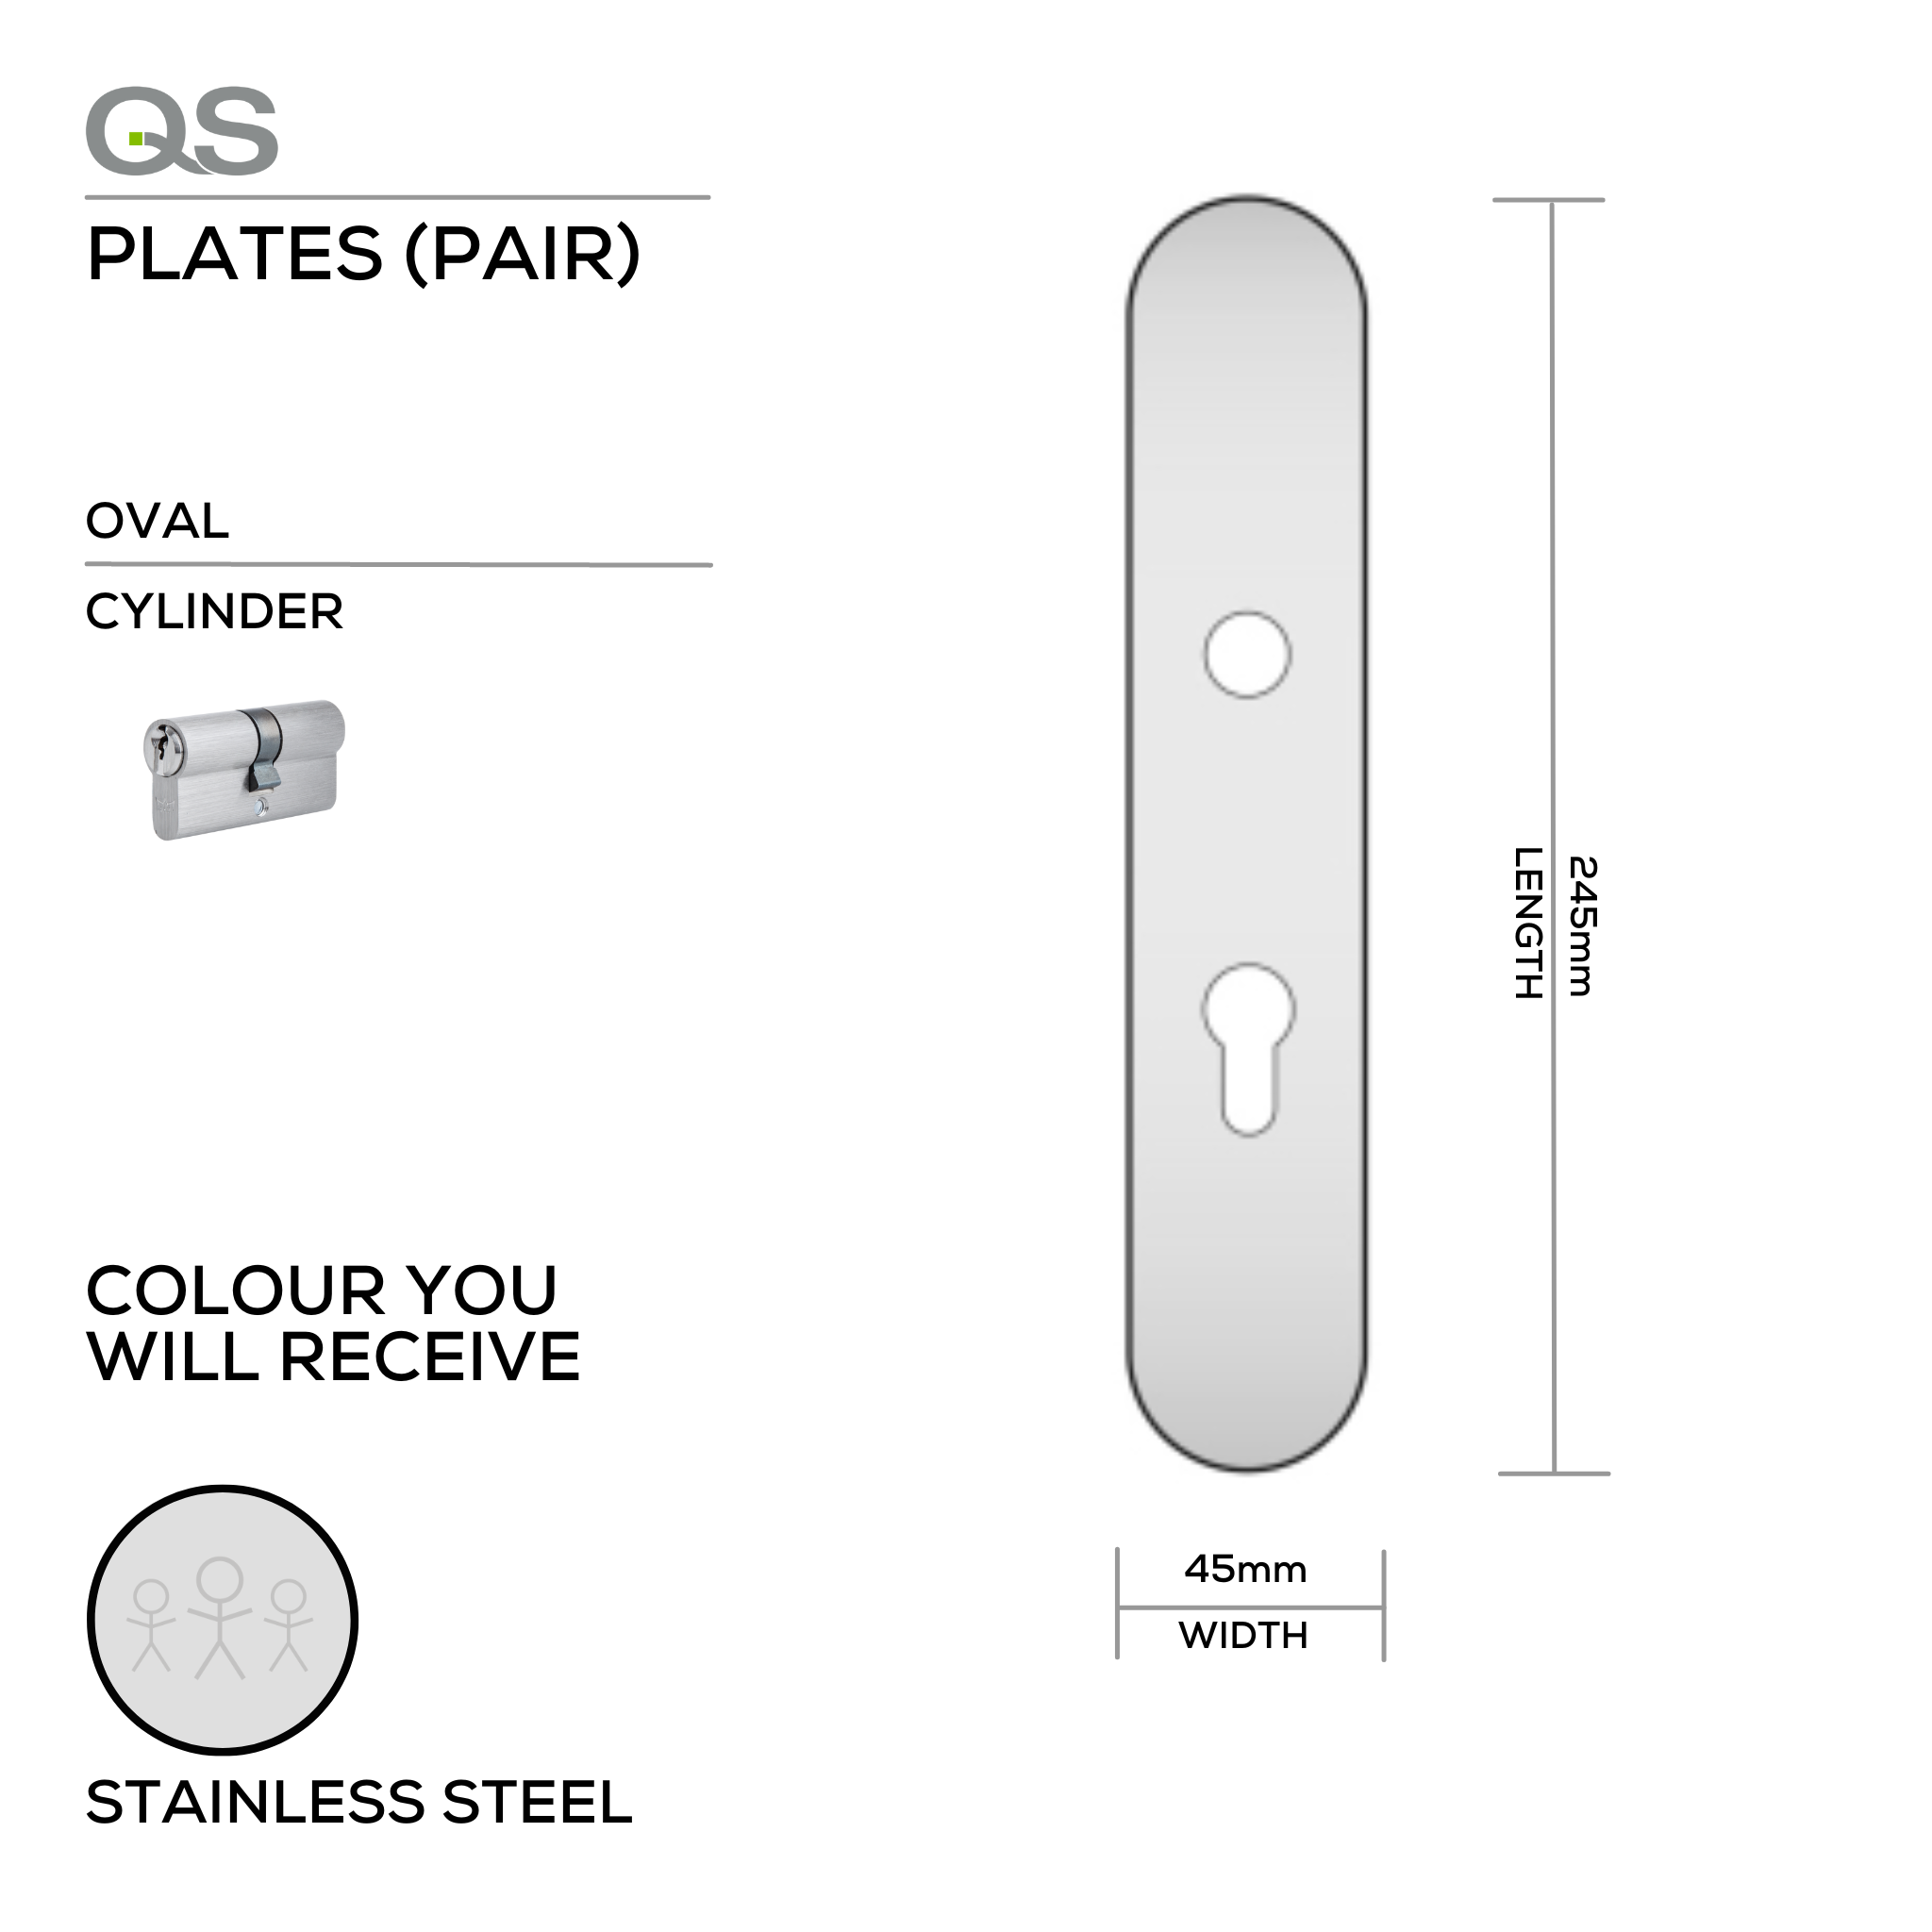 QS4484 CYL, Plate, Oval, 245mm (l) x 45mm (w), Supplied with QS Handle, Stainless Steel, QS